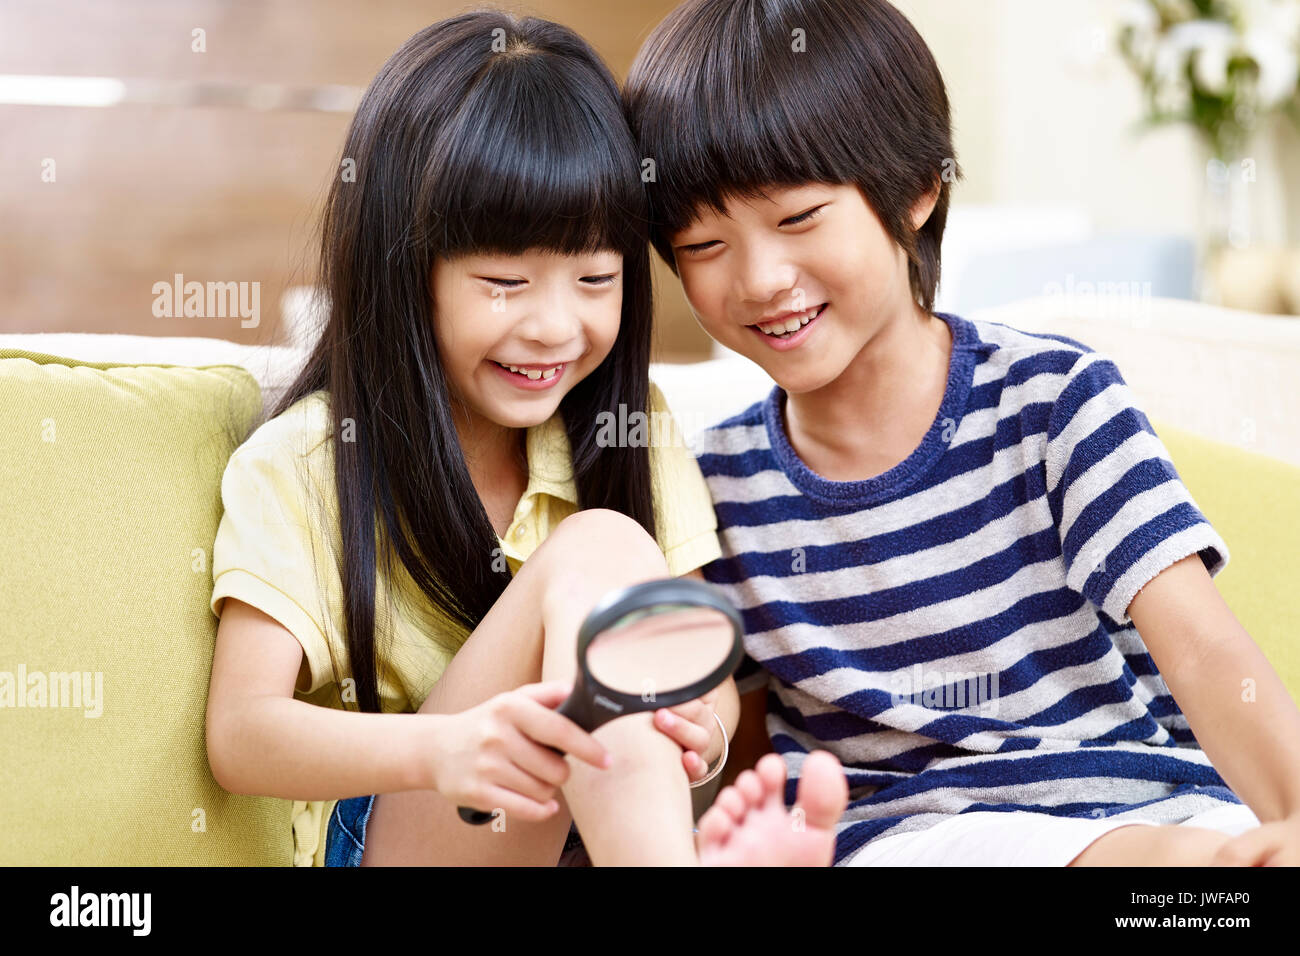 two asian children sitting on couch at home having fun playing with a magnifying glass. Stock Photo